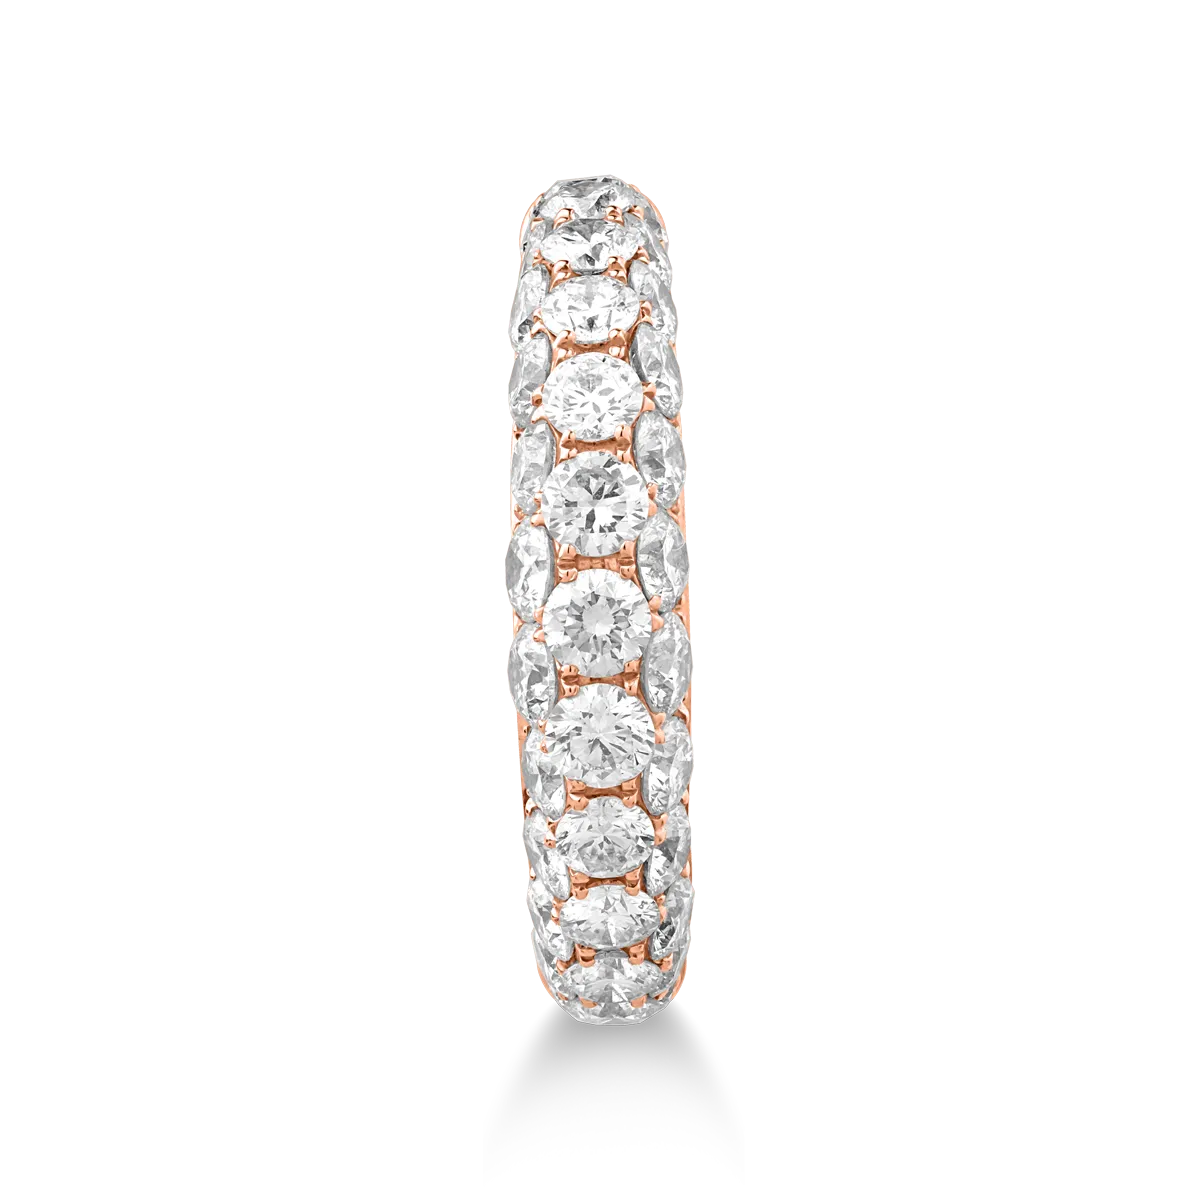 18K rose gold ring with 2.03ct diamonds